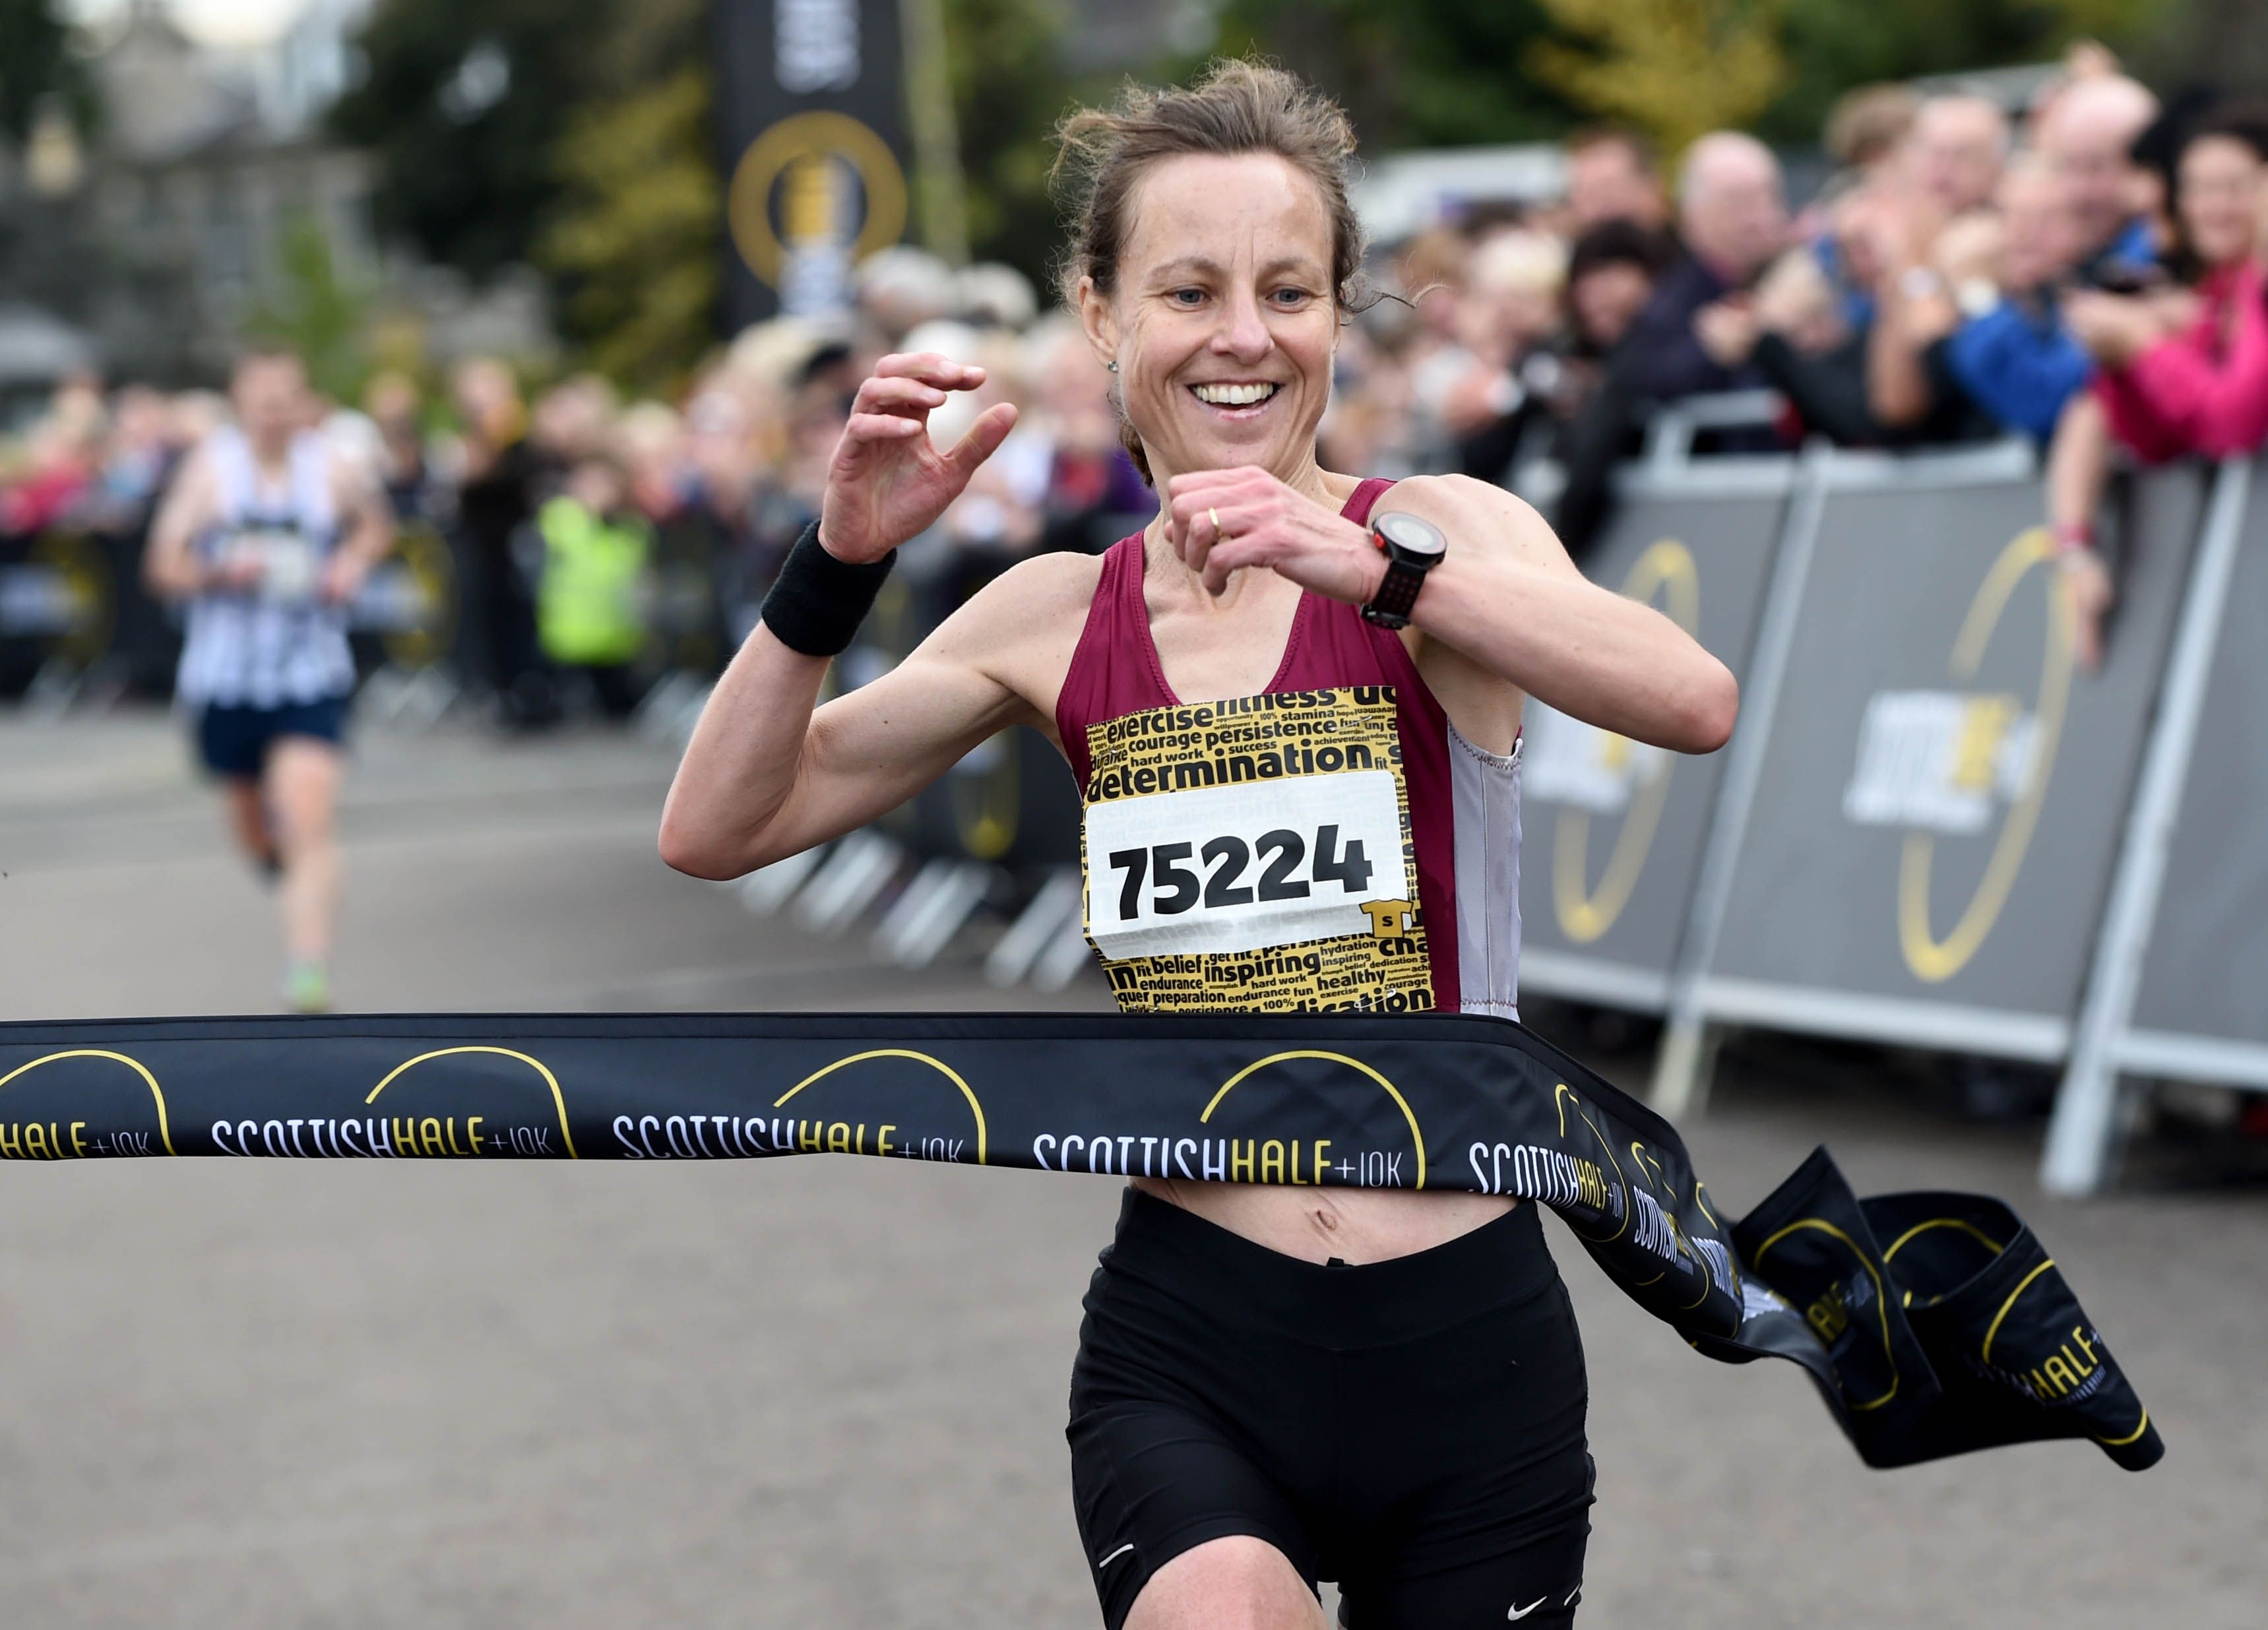 2017 Lisa Finaly breaks the tape to set a new Scottish Half Marathon course record